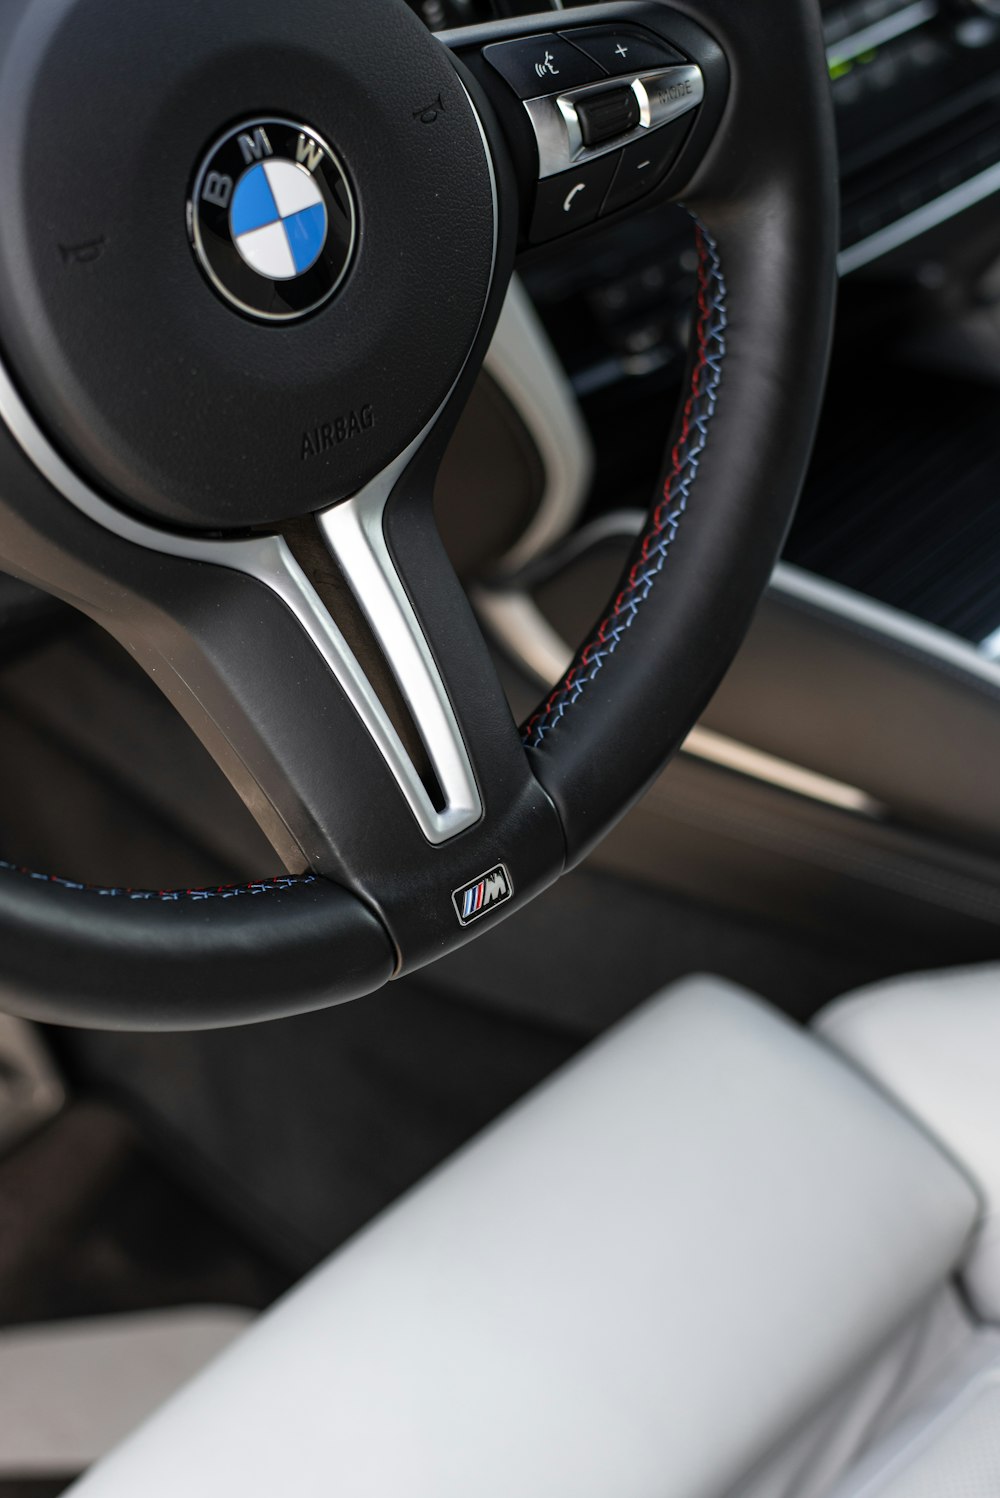 the steering wheel of a bmw vehicle